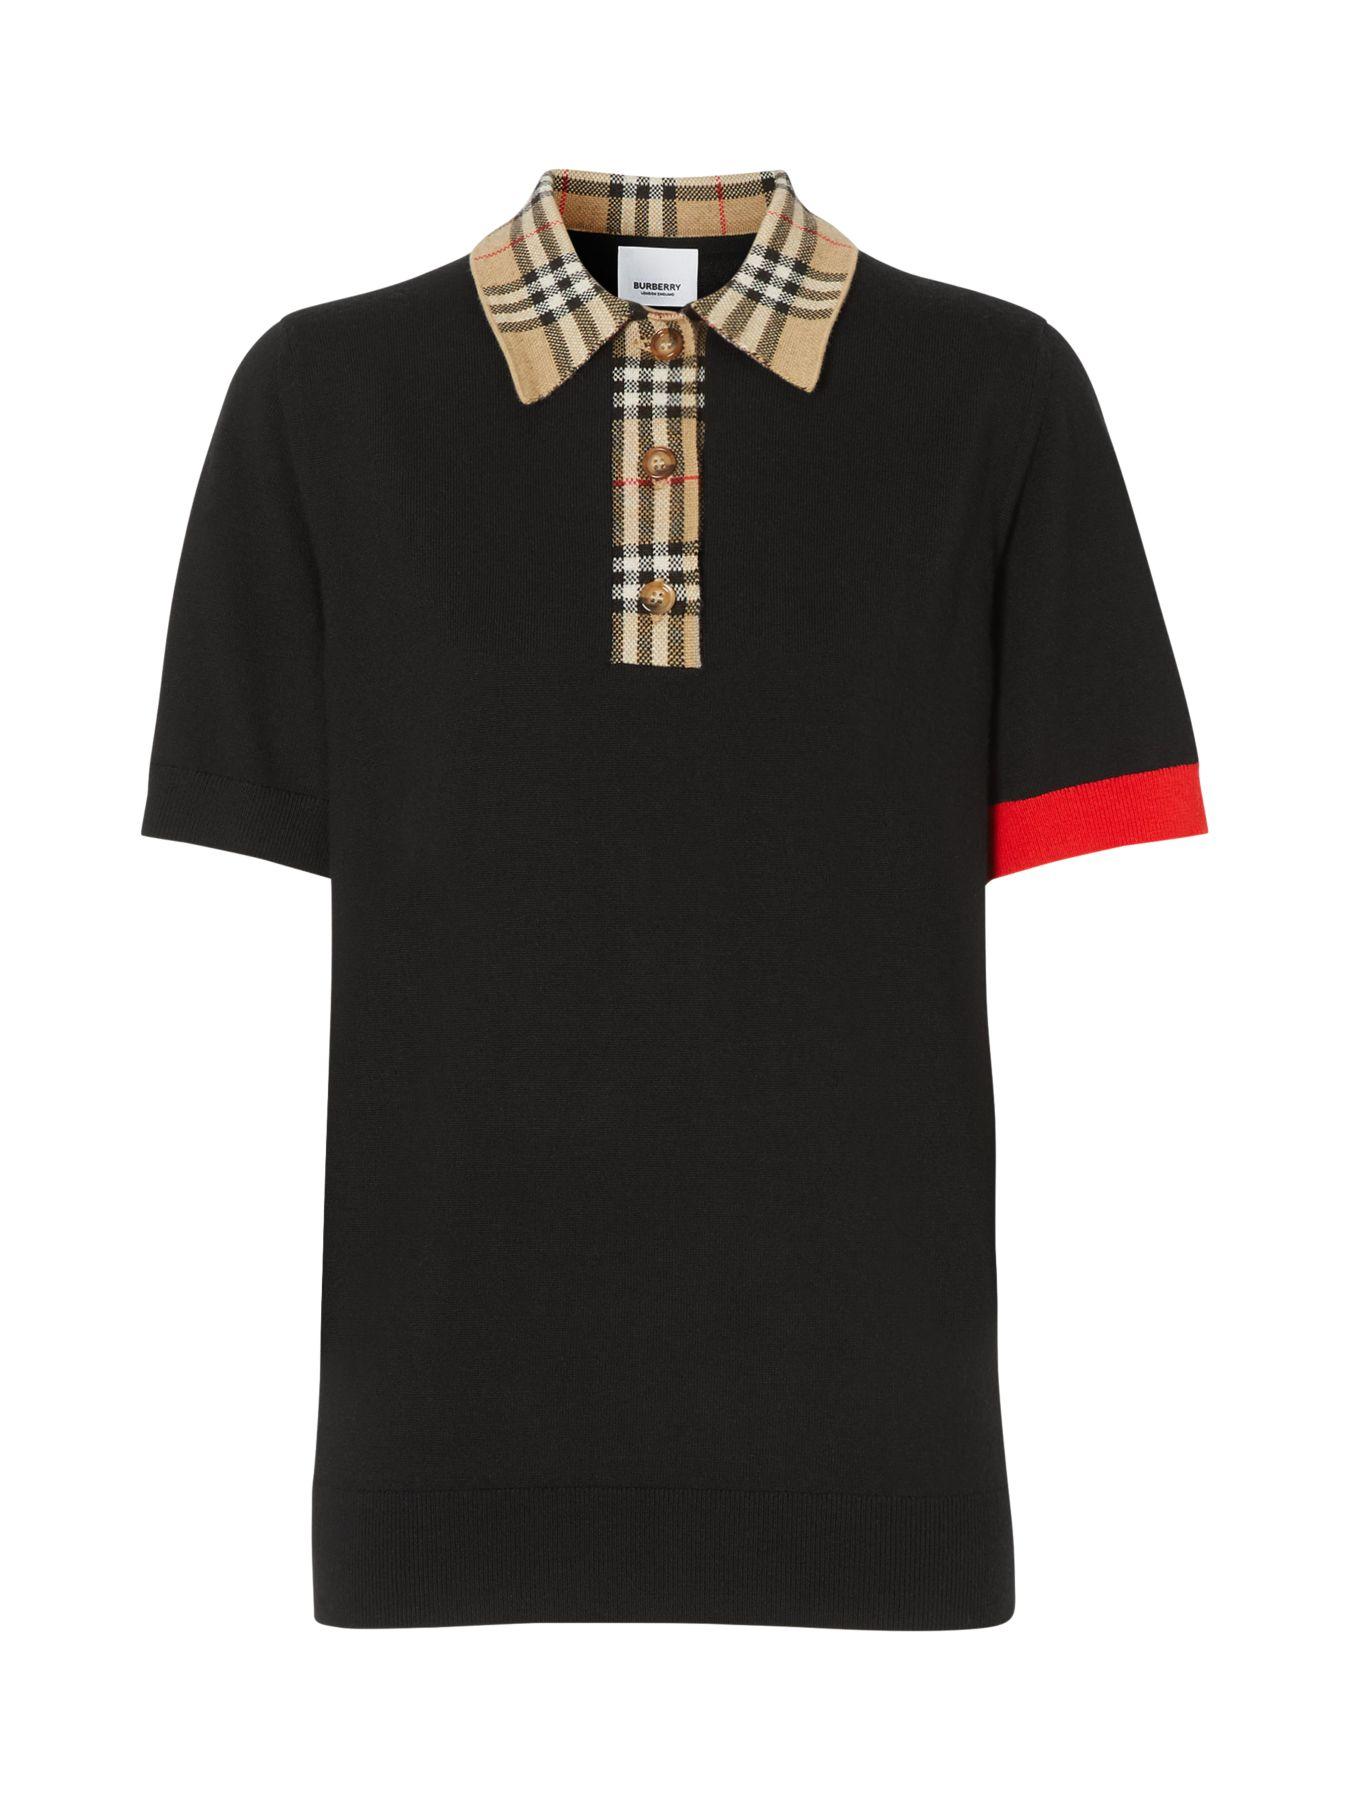 Burberry Wool Penk Short Sleeve Check Collar Polo in Black - Lyst